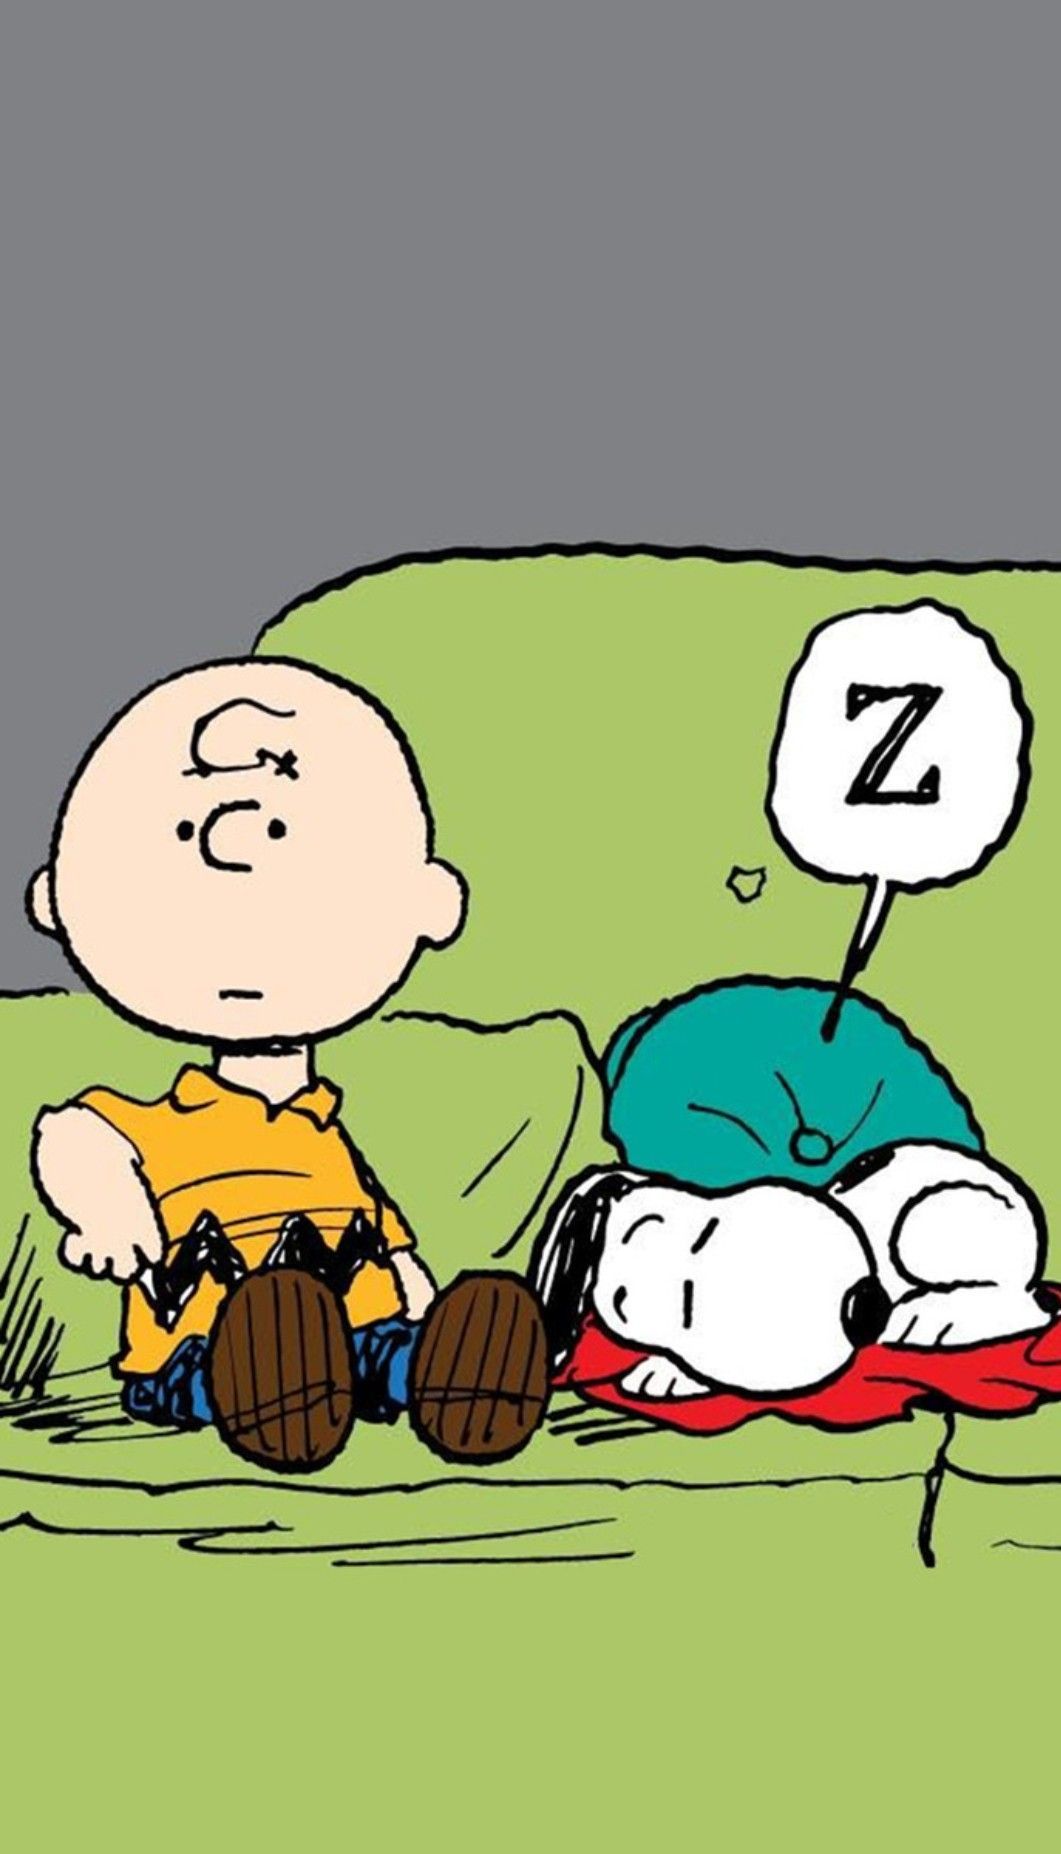 Charlie Brown and a sleeping Snoopy. Snoopy love, Snoopy